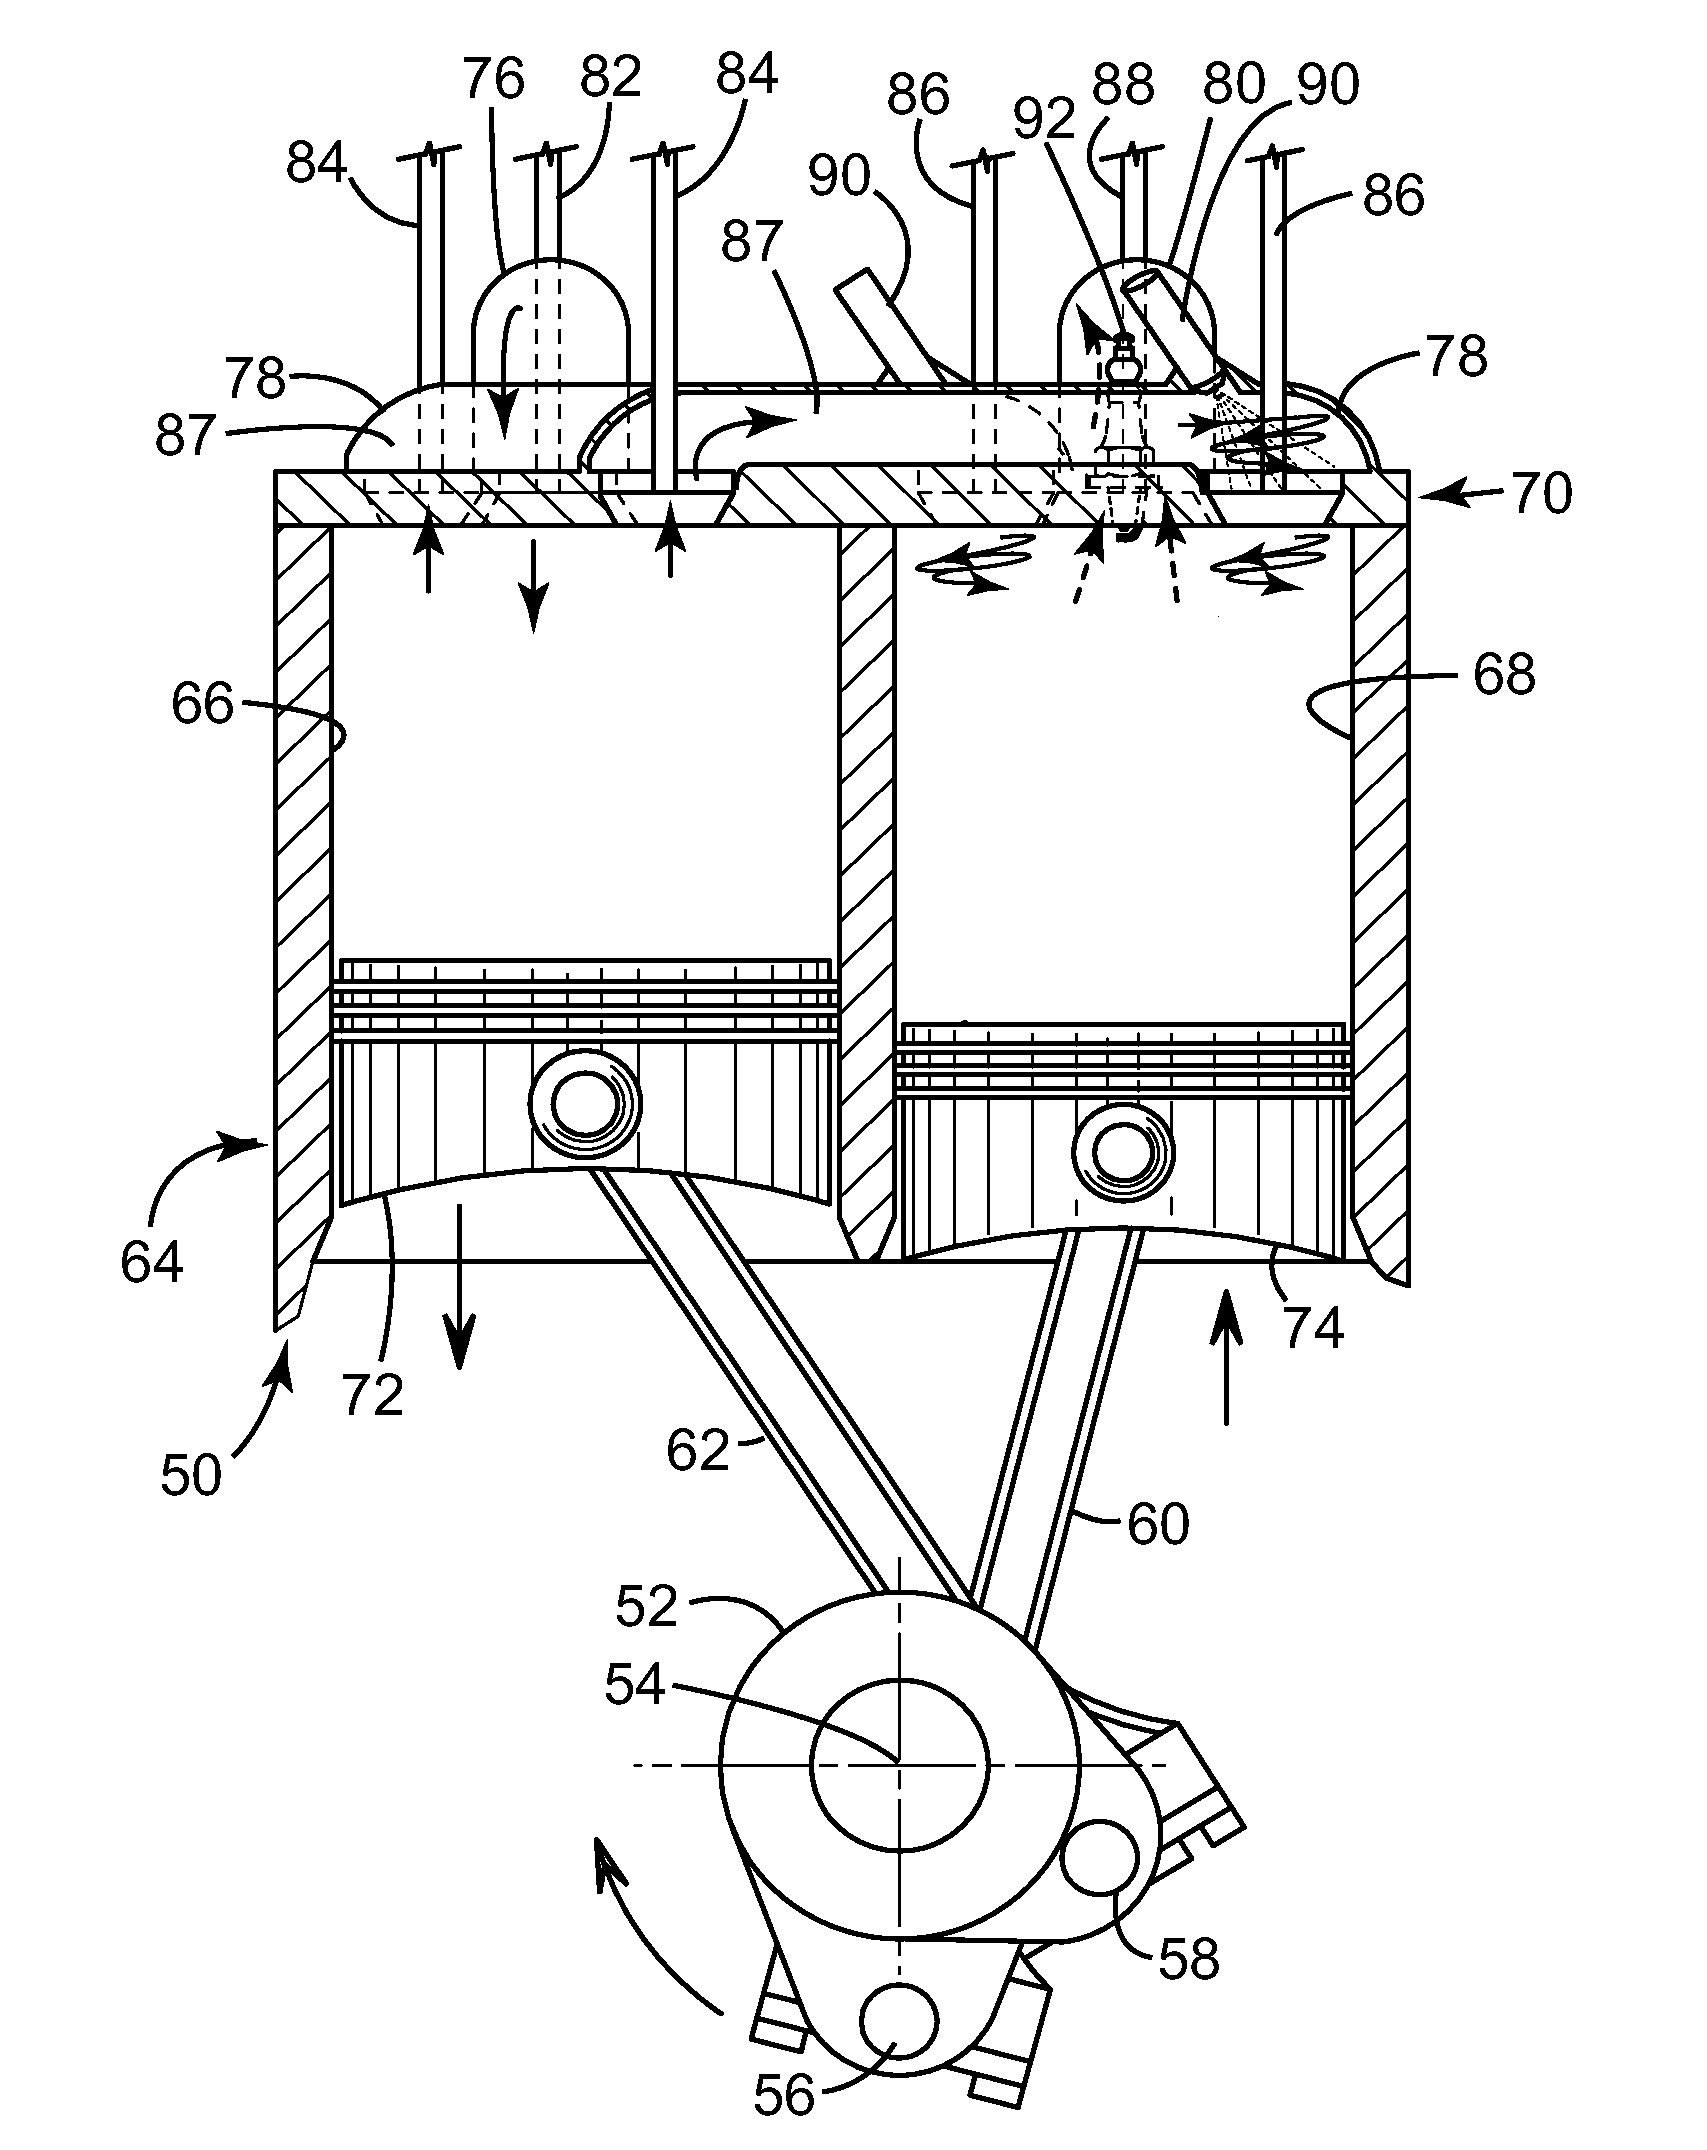 Split-cycle engine with dual spray targeting fuel injection